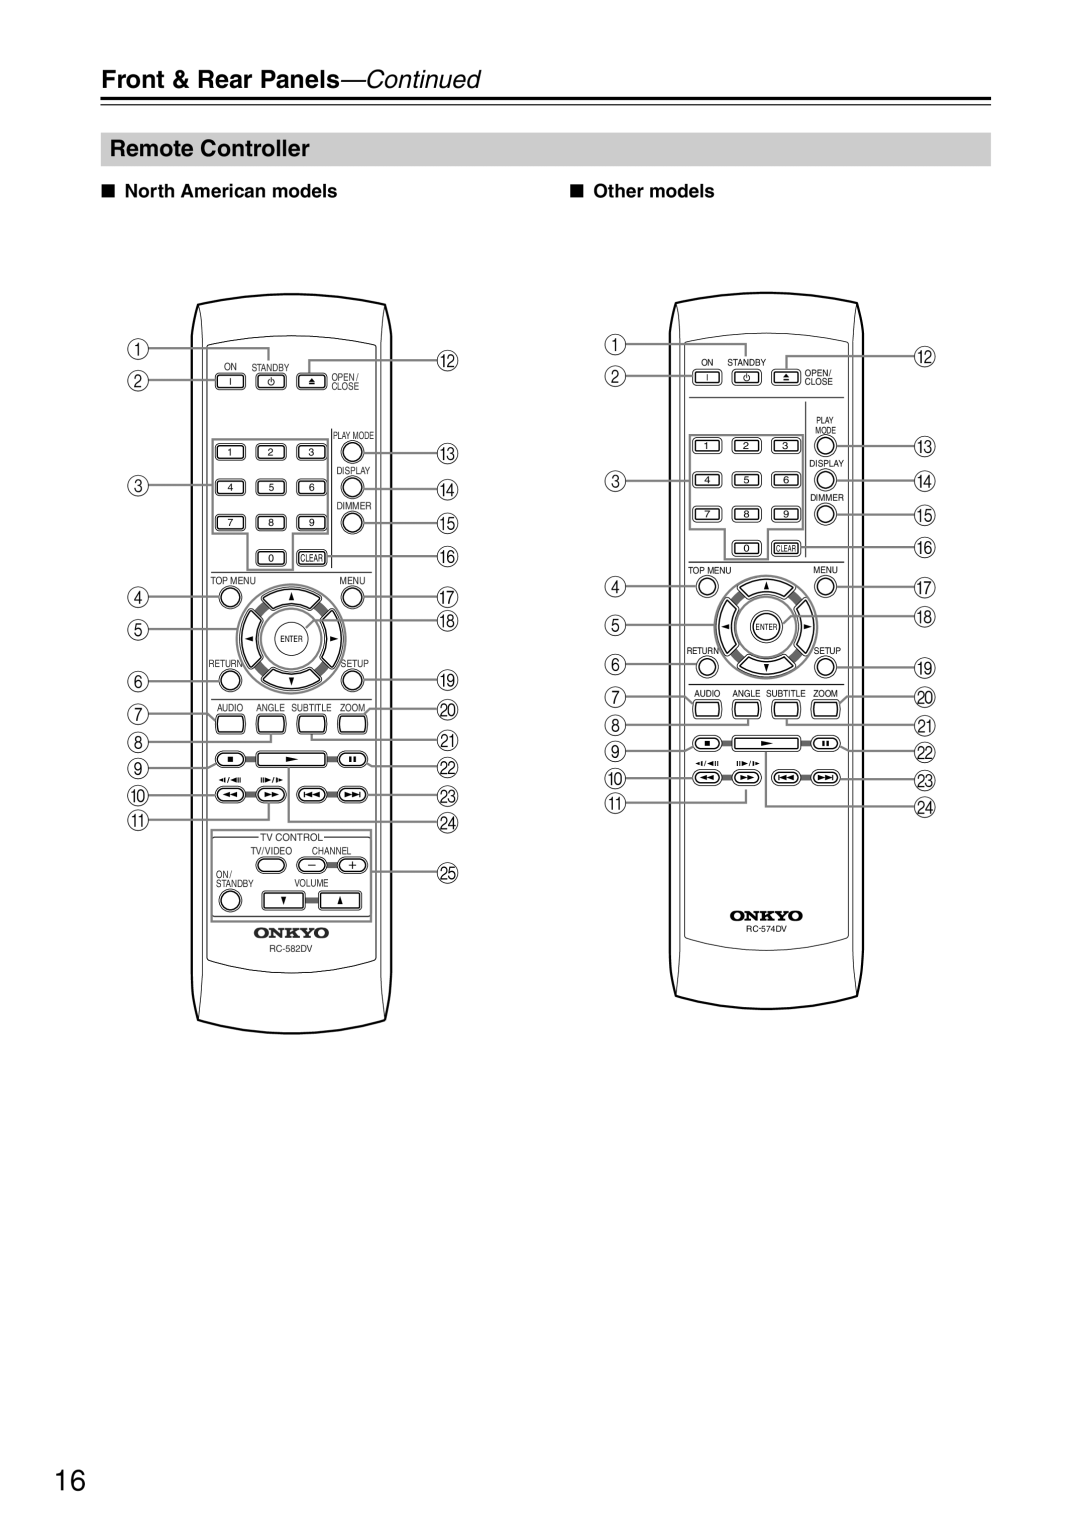 Onkyo DV-SP503E instruction manual Remote Controller, Front & Rear Panels-Continued 